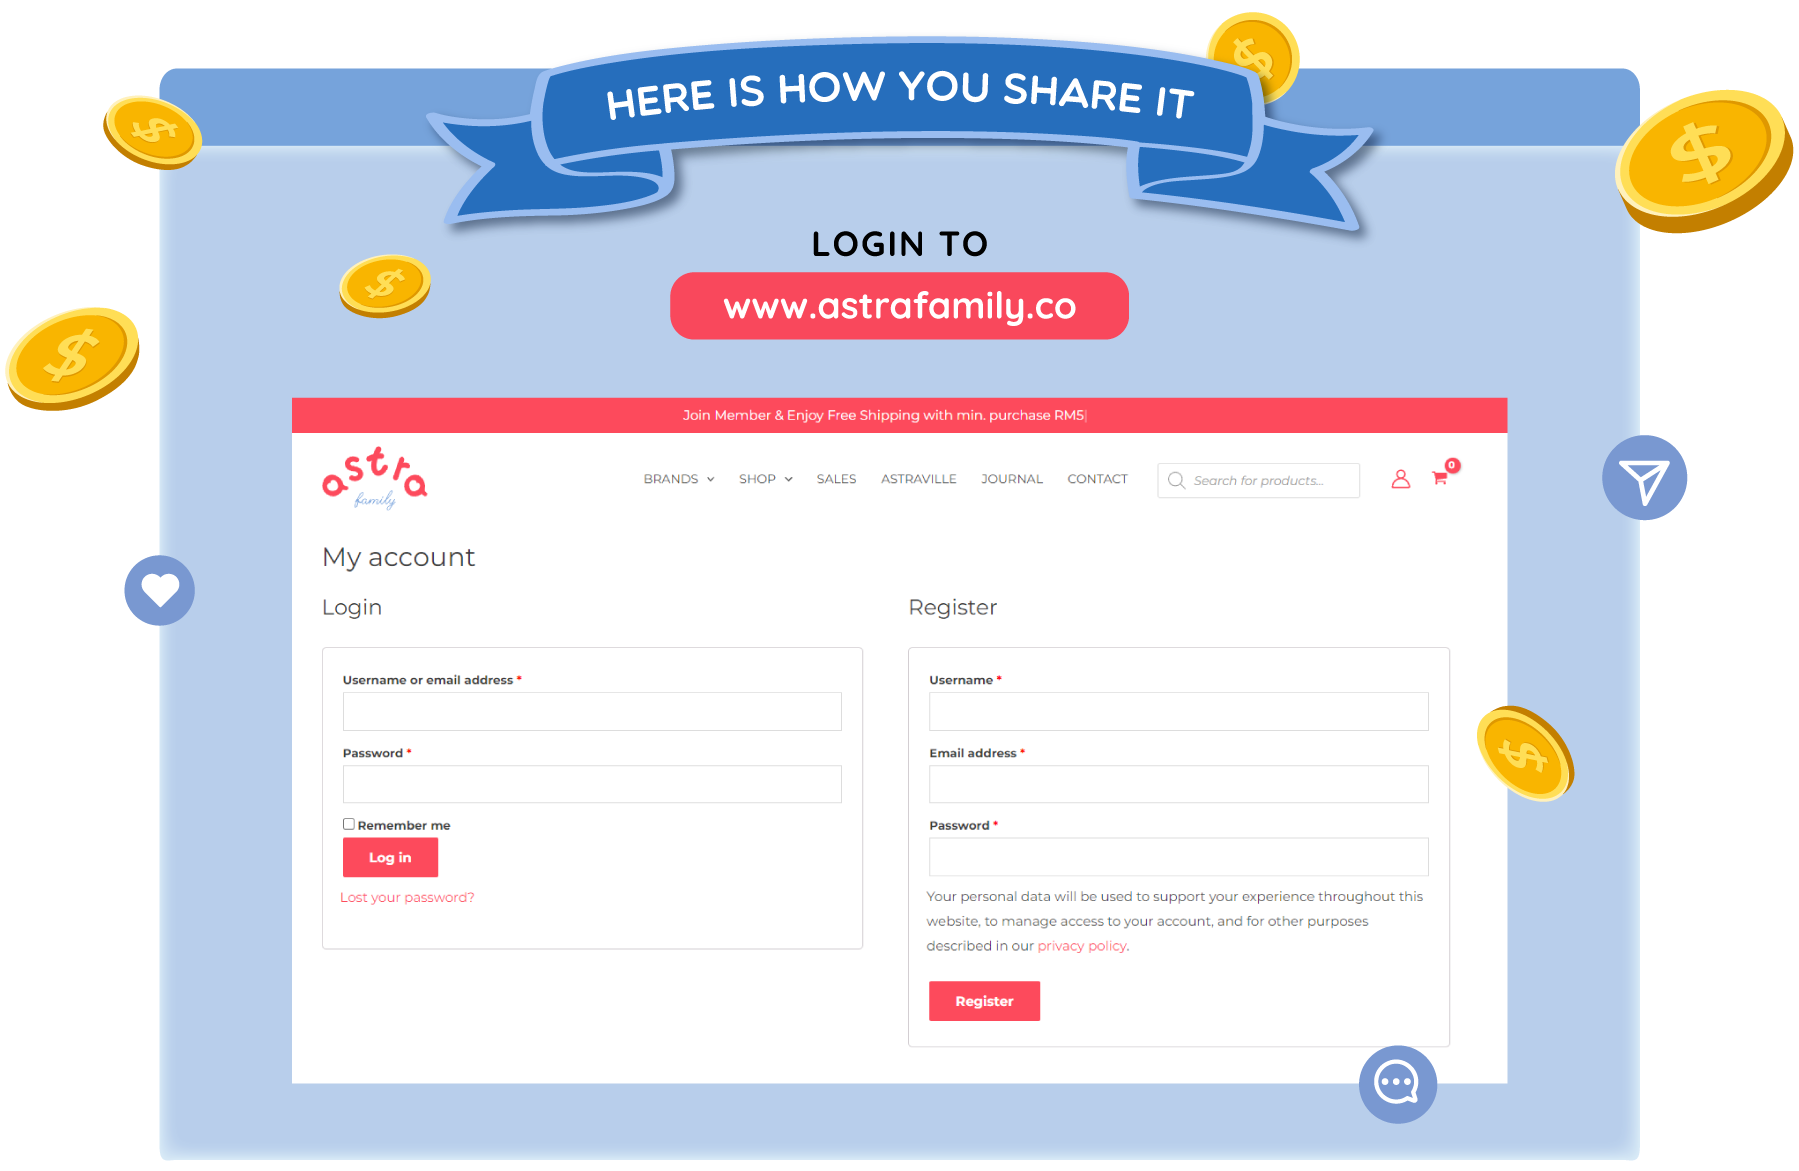 Astra Family A sign up page where users can Share & Earn coins by clicking on the sign up button.